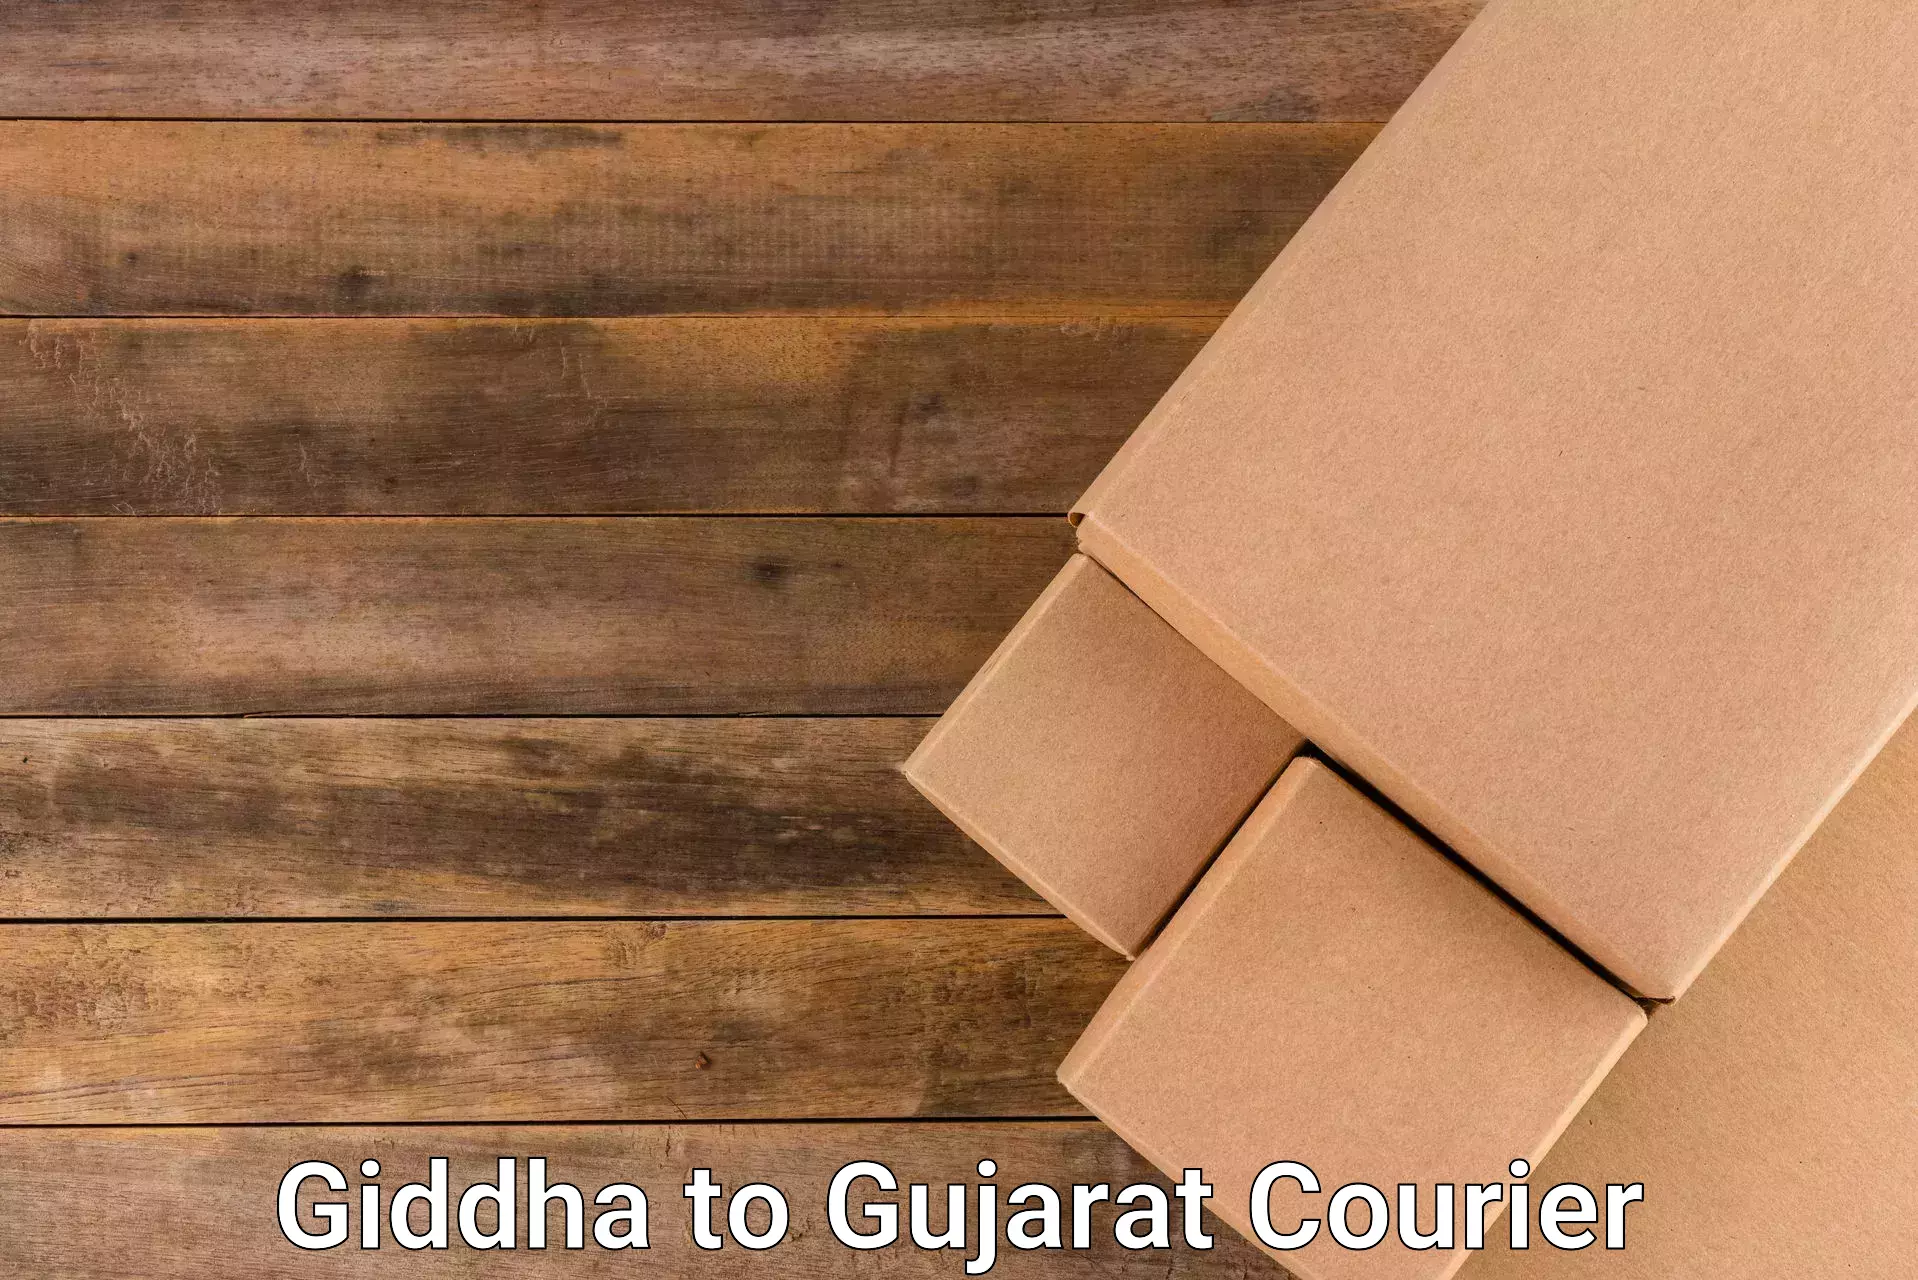 Courier service innovation Giddha to Limbdi